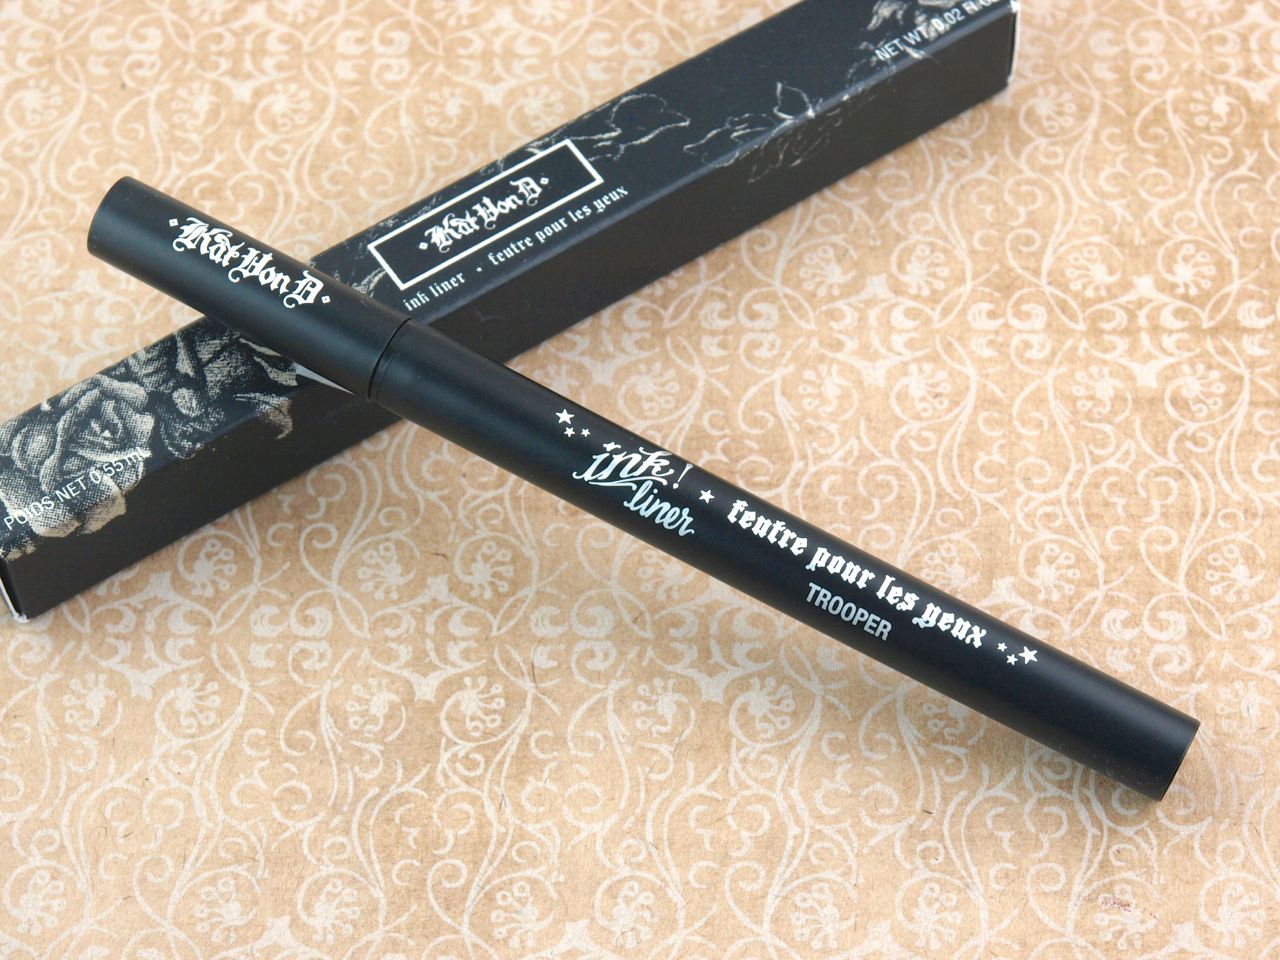 Kat Von D Ink Liner in "Trooper": Review and Swatches | The Happy Sloths: Beauty, Makeup, and Skincare Blog with Reviews and